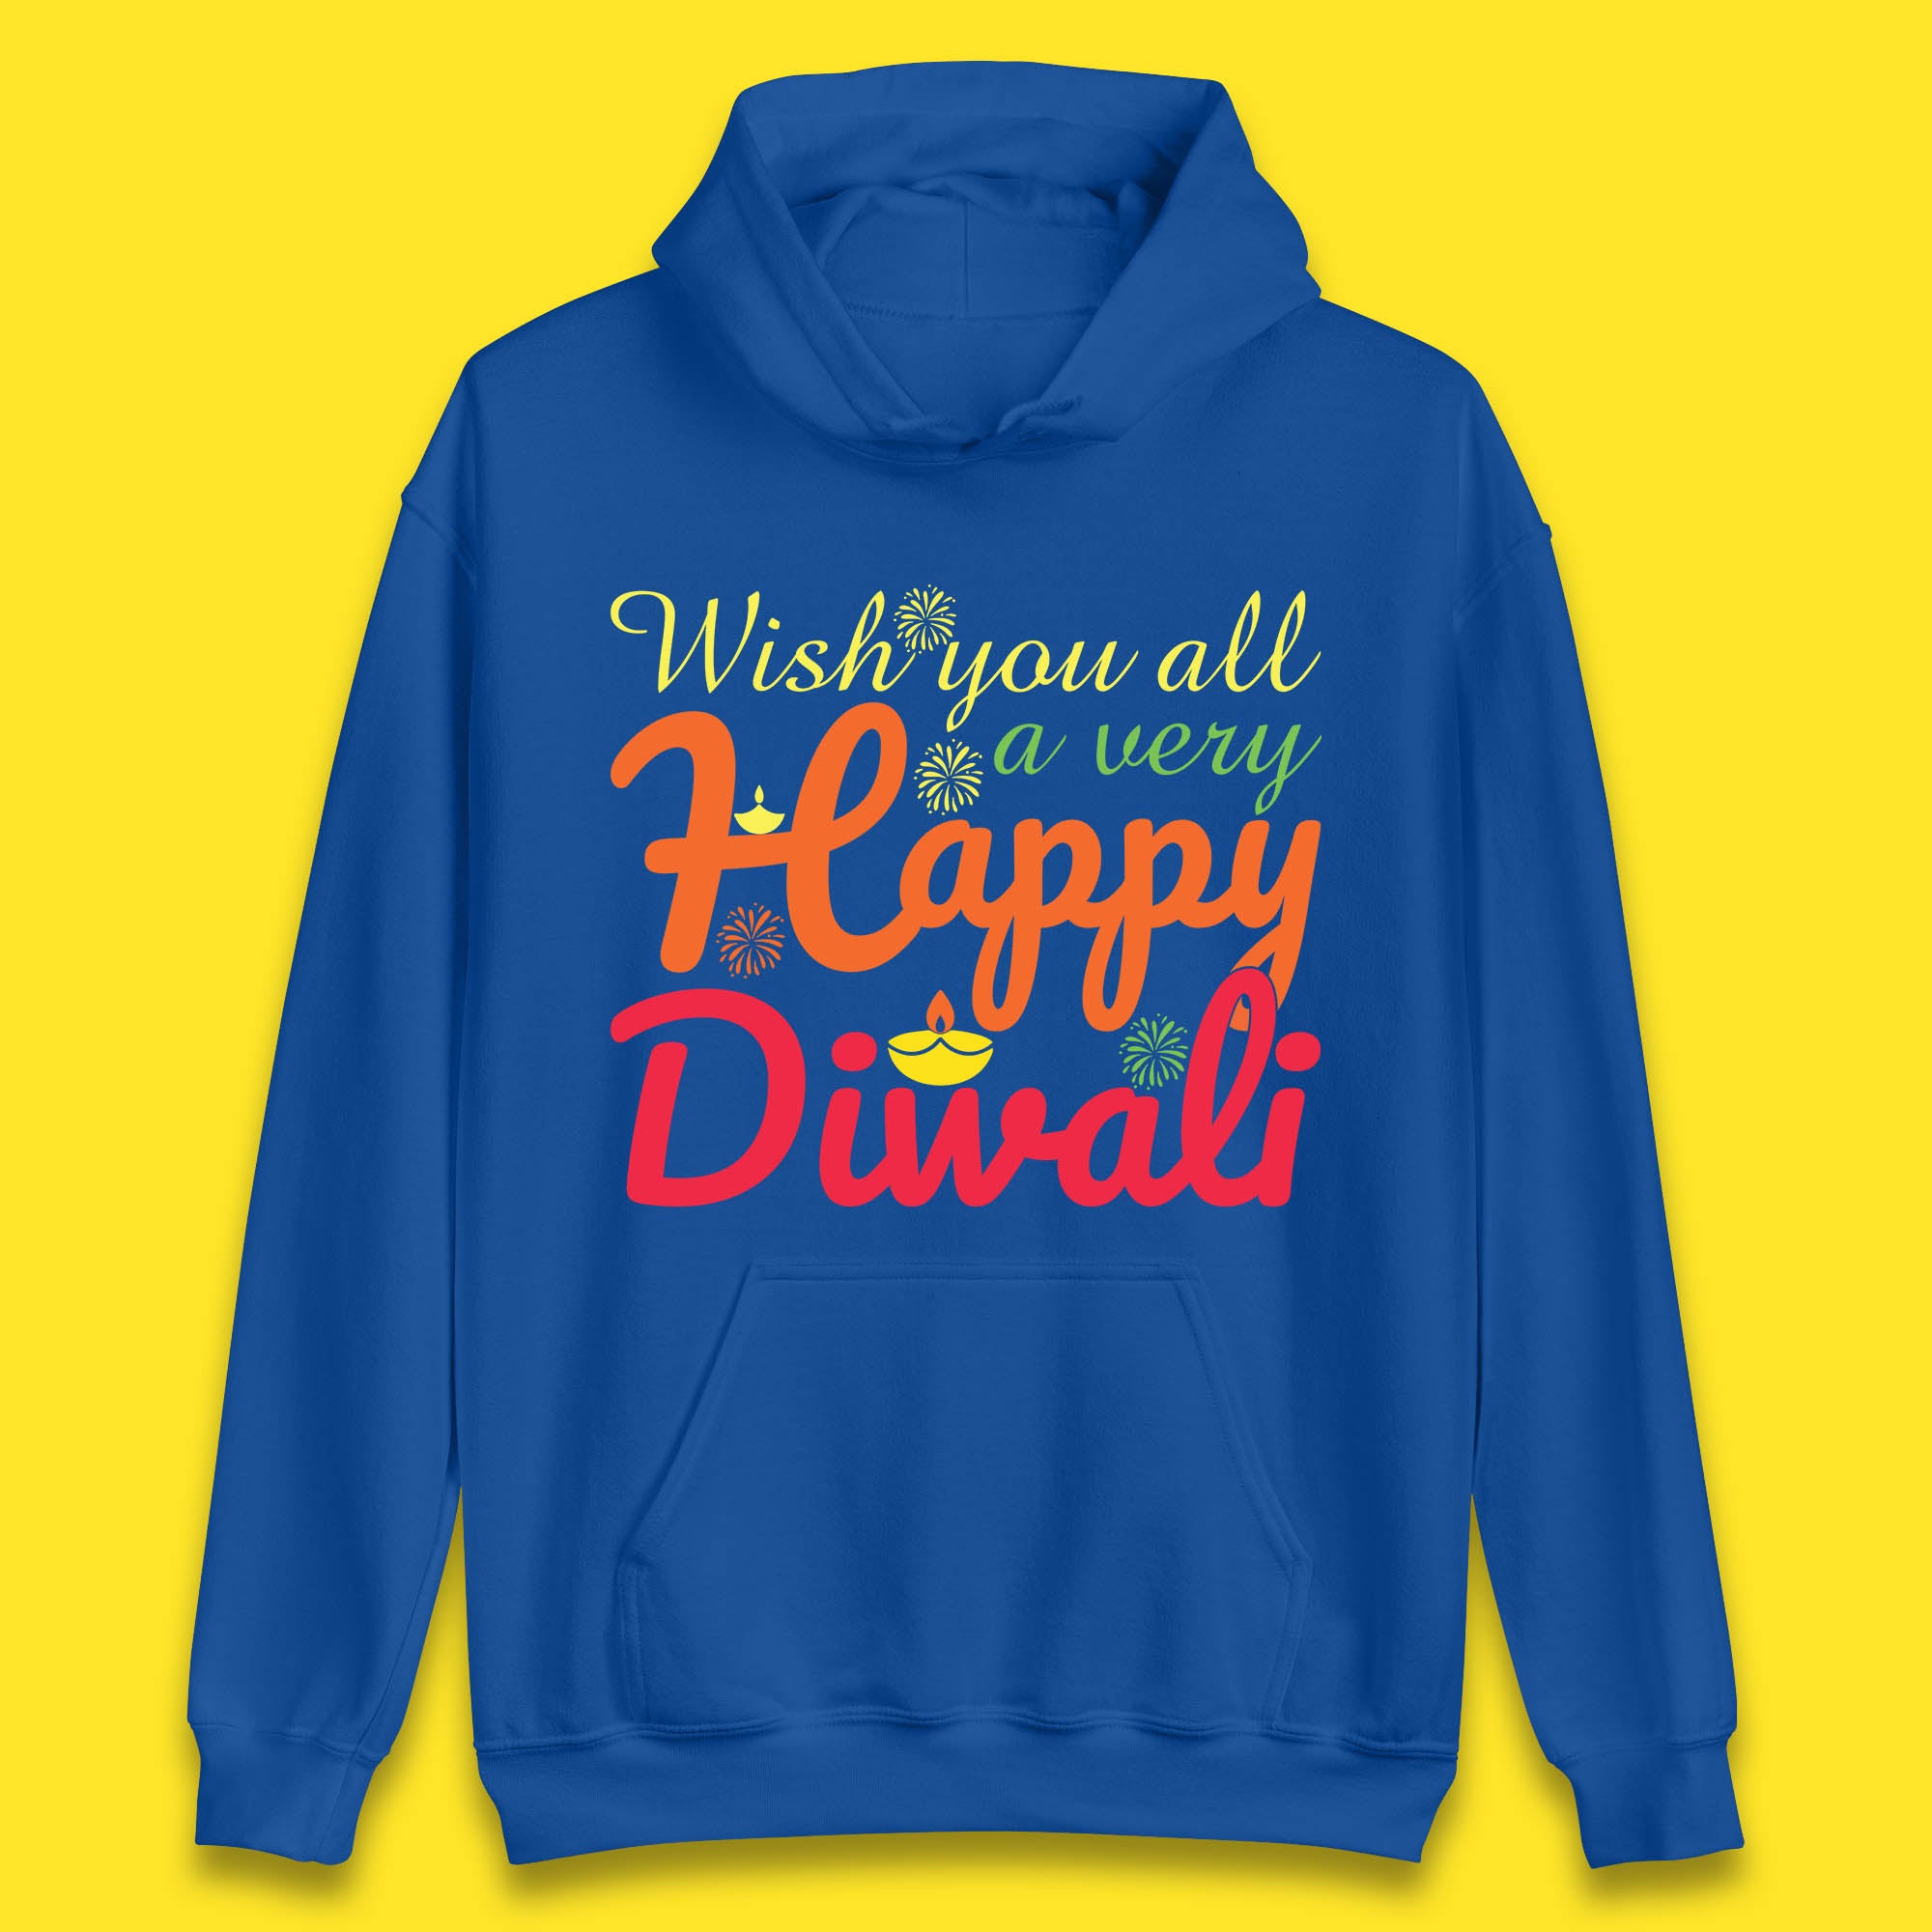 Wish You All A Very Happy Diwali Festival Of Lights Indian Diwali Holiday Celebration Unisex Hoodie